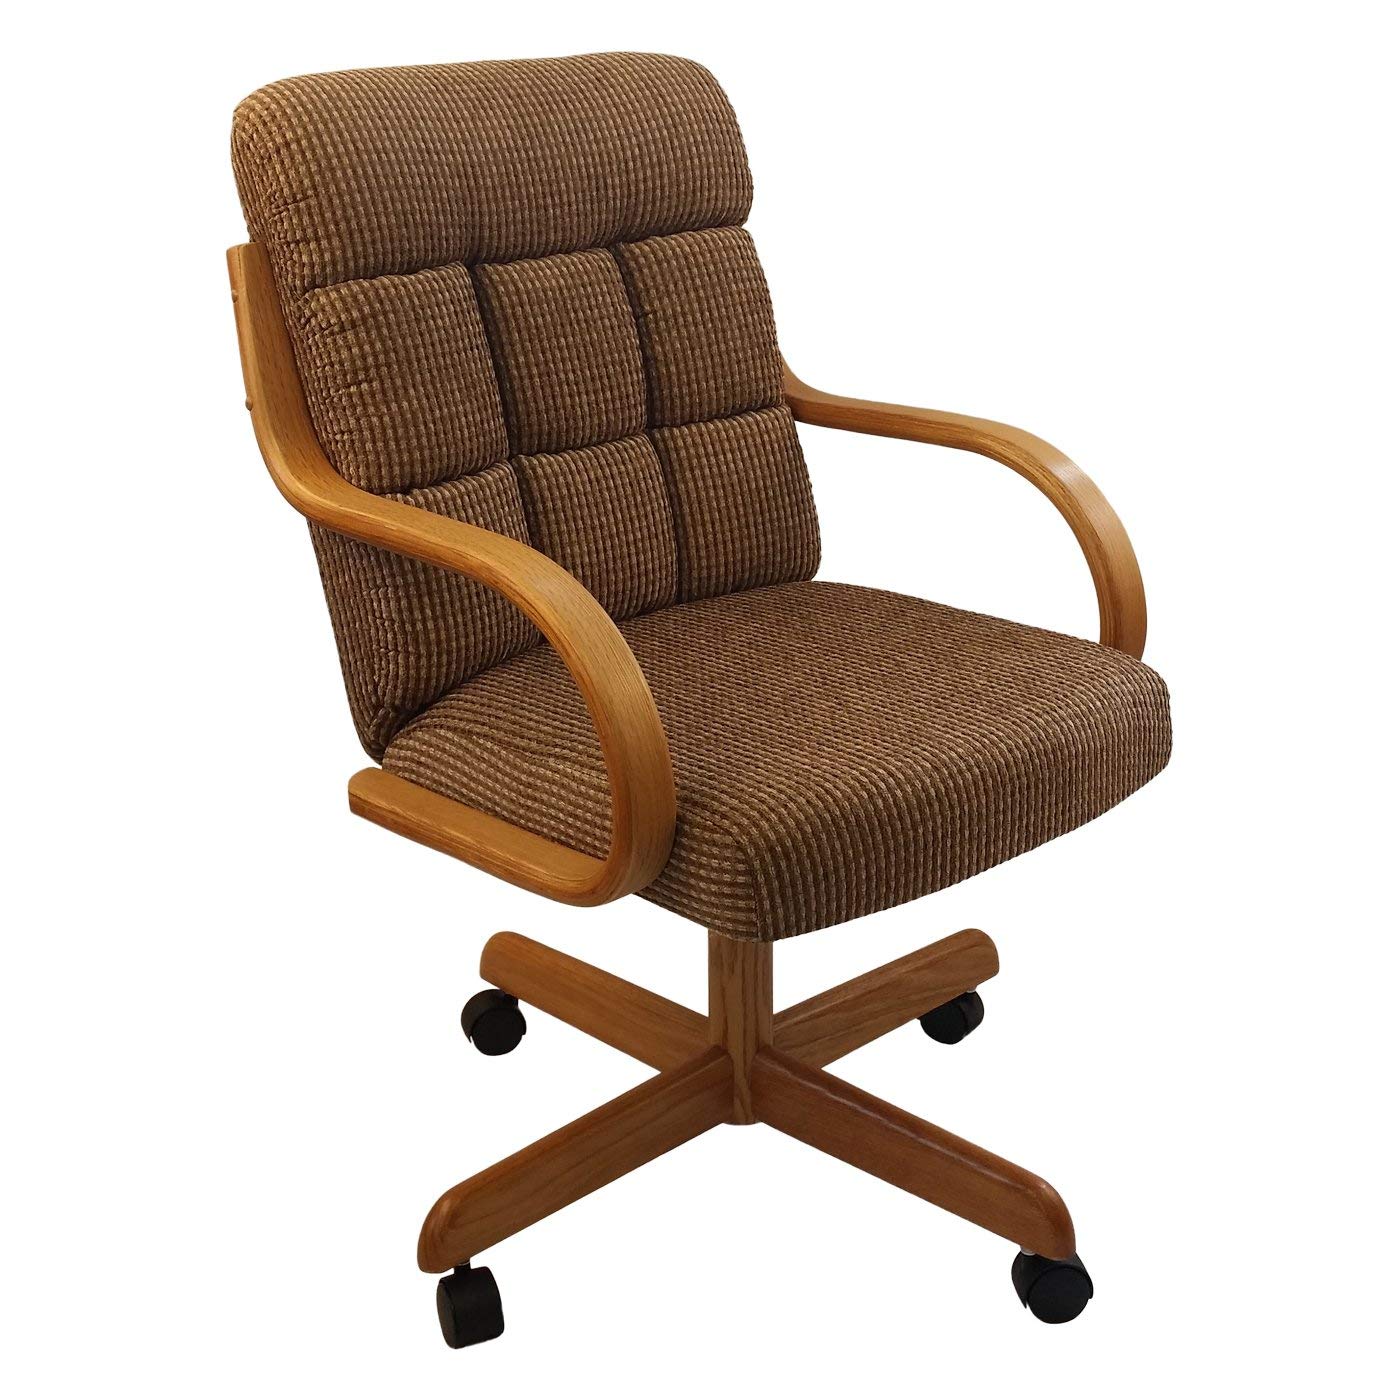 Caster Chair Company Casual Rolling Caster Dining Chair with Swivel Tilt in Honey Oak Wood with Caramel Fabric Seat and Back (1 